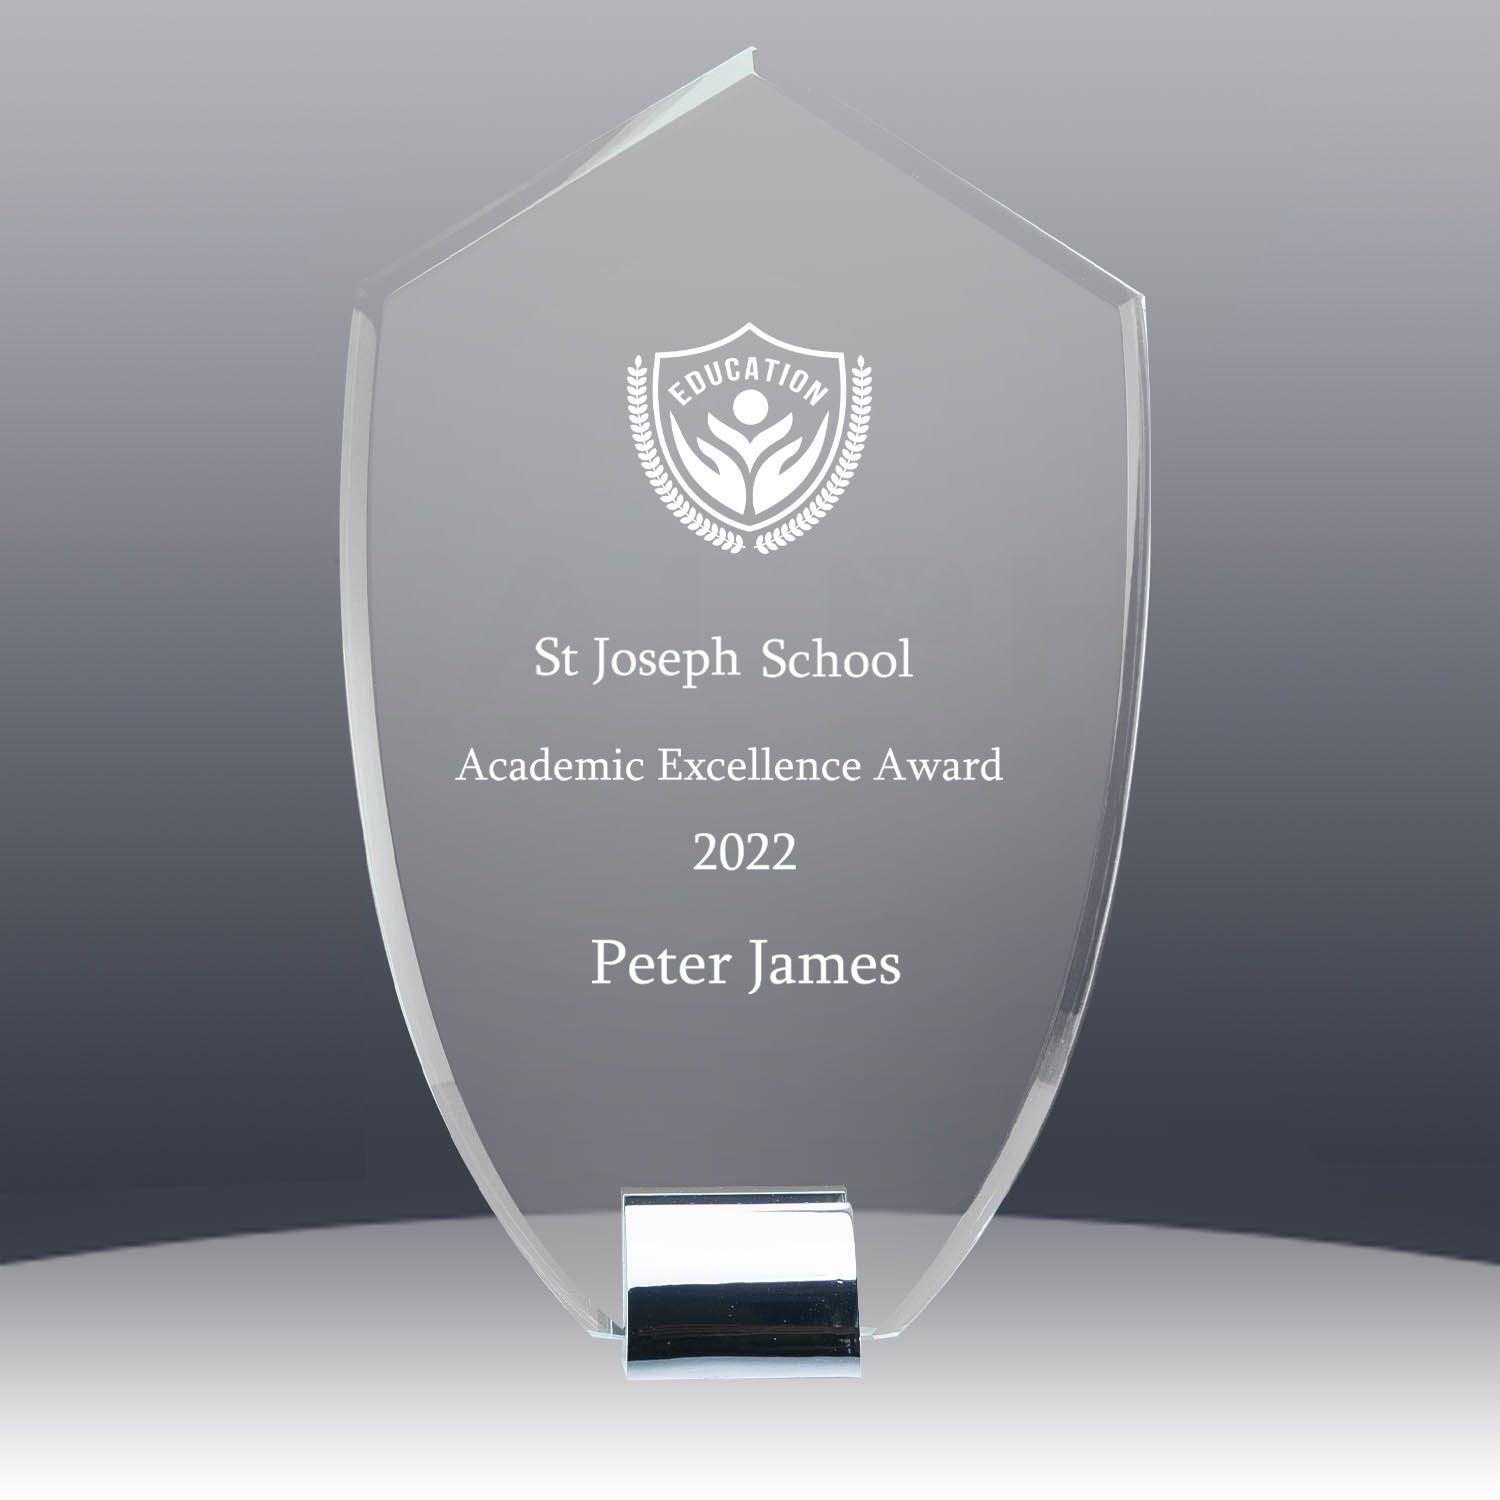 knight-glass-metal-award-gm123a-with-text